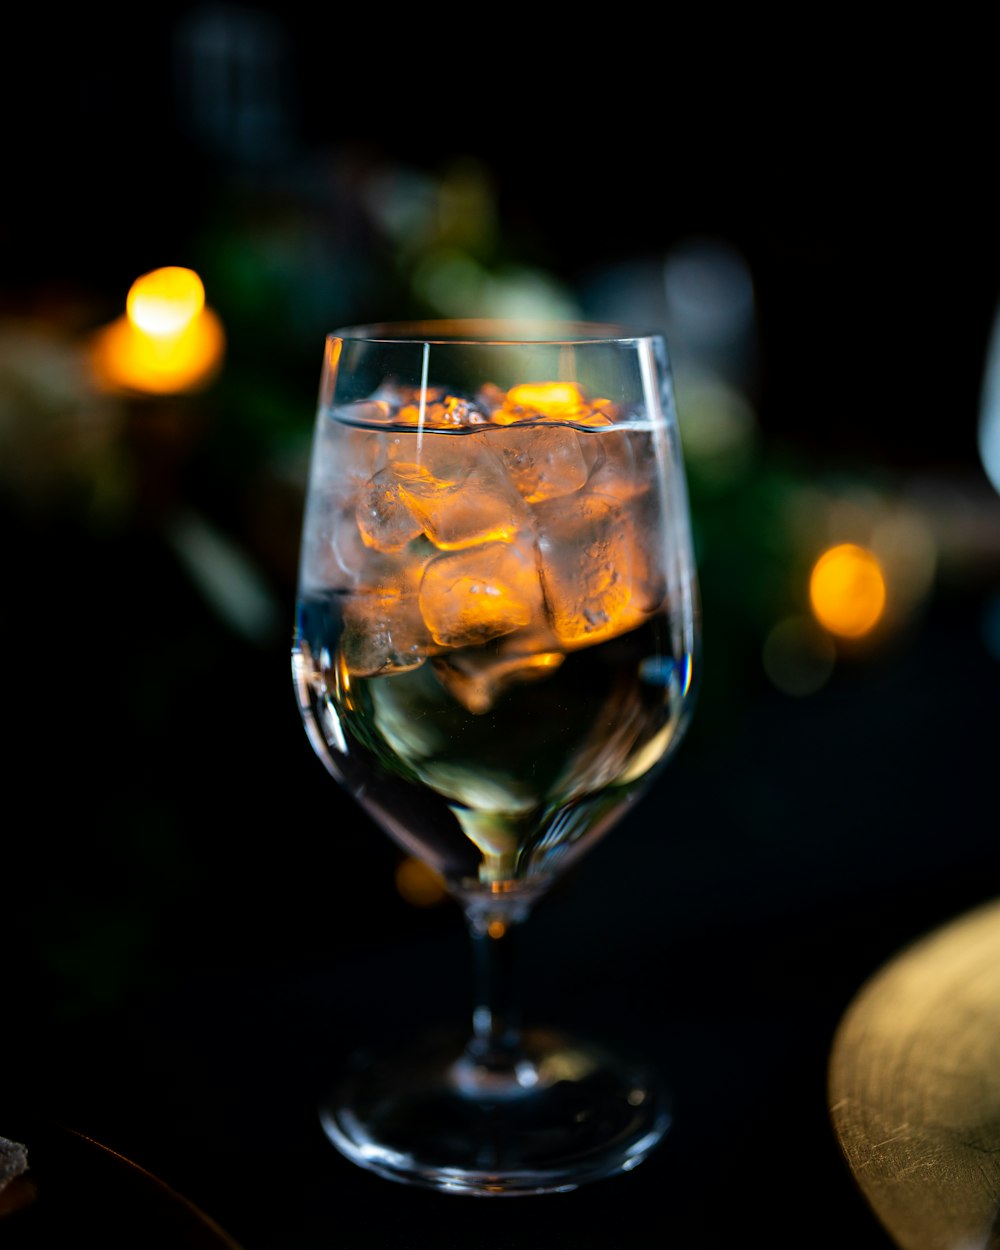 clear wine glass with yellow liquid